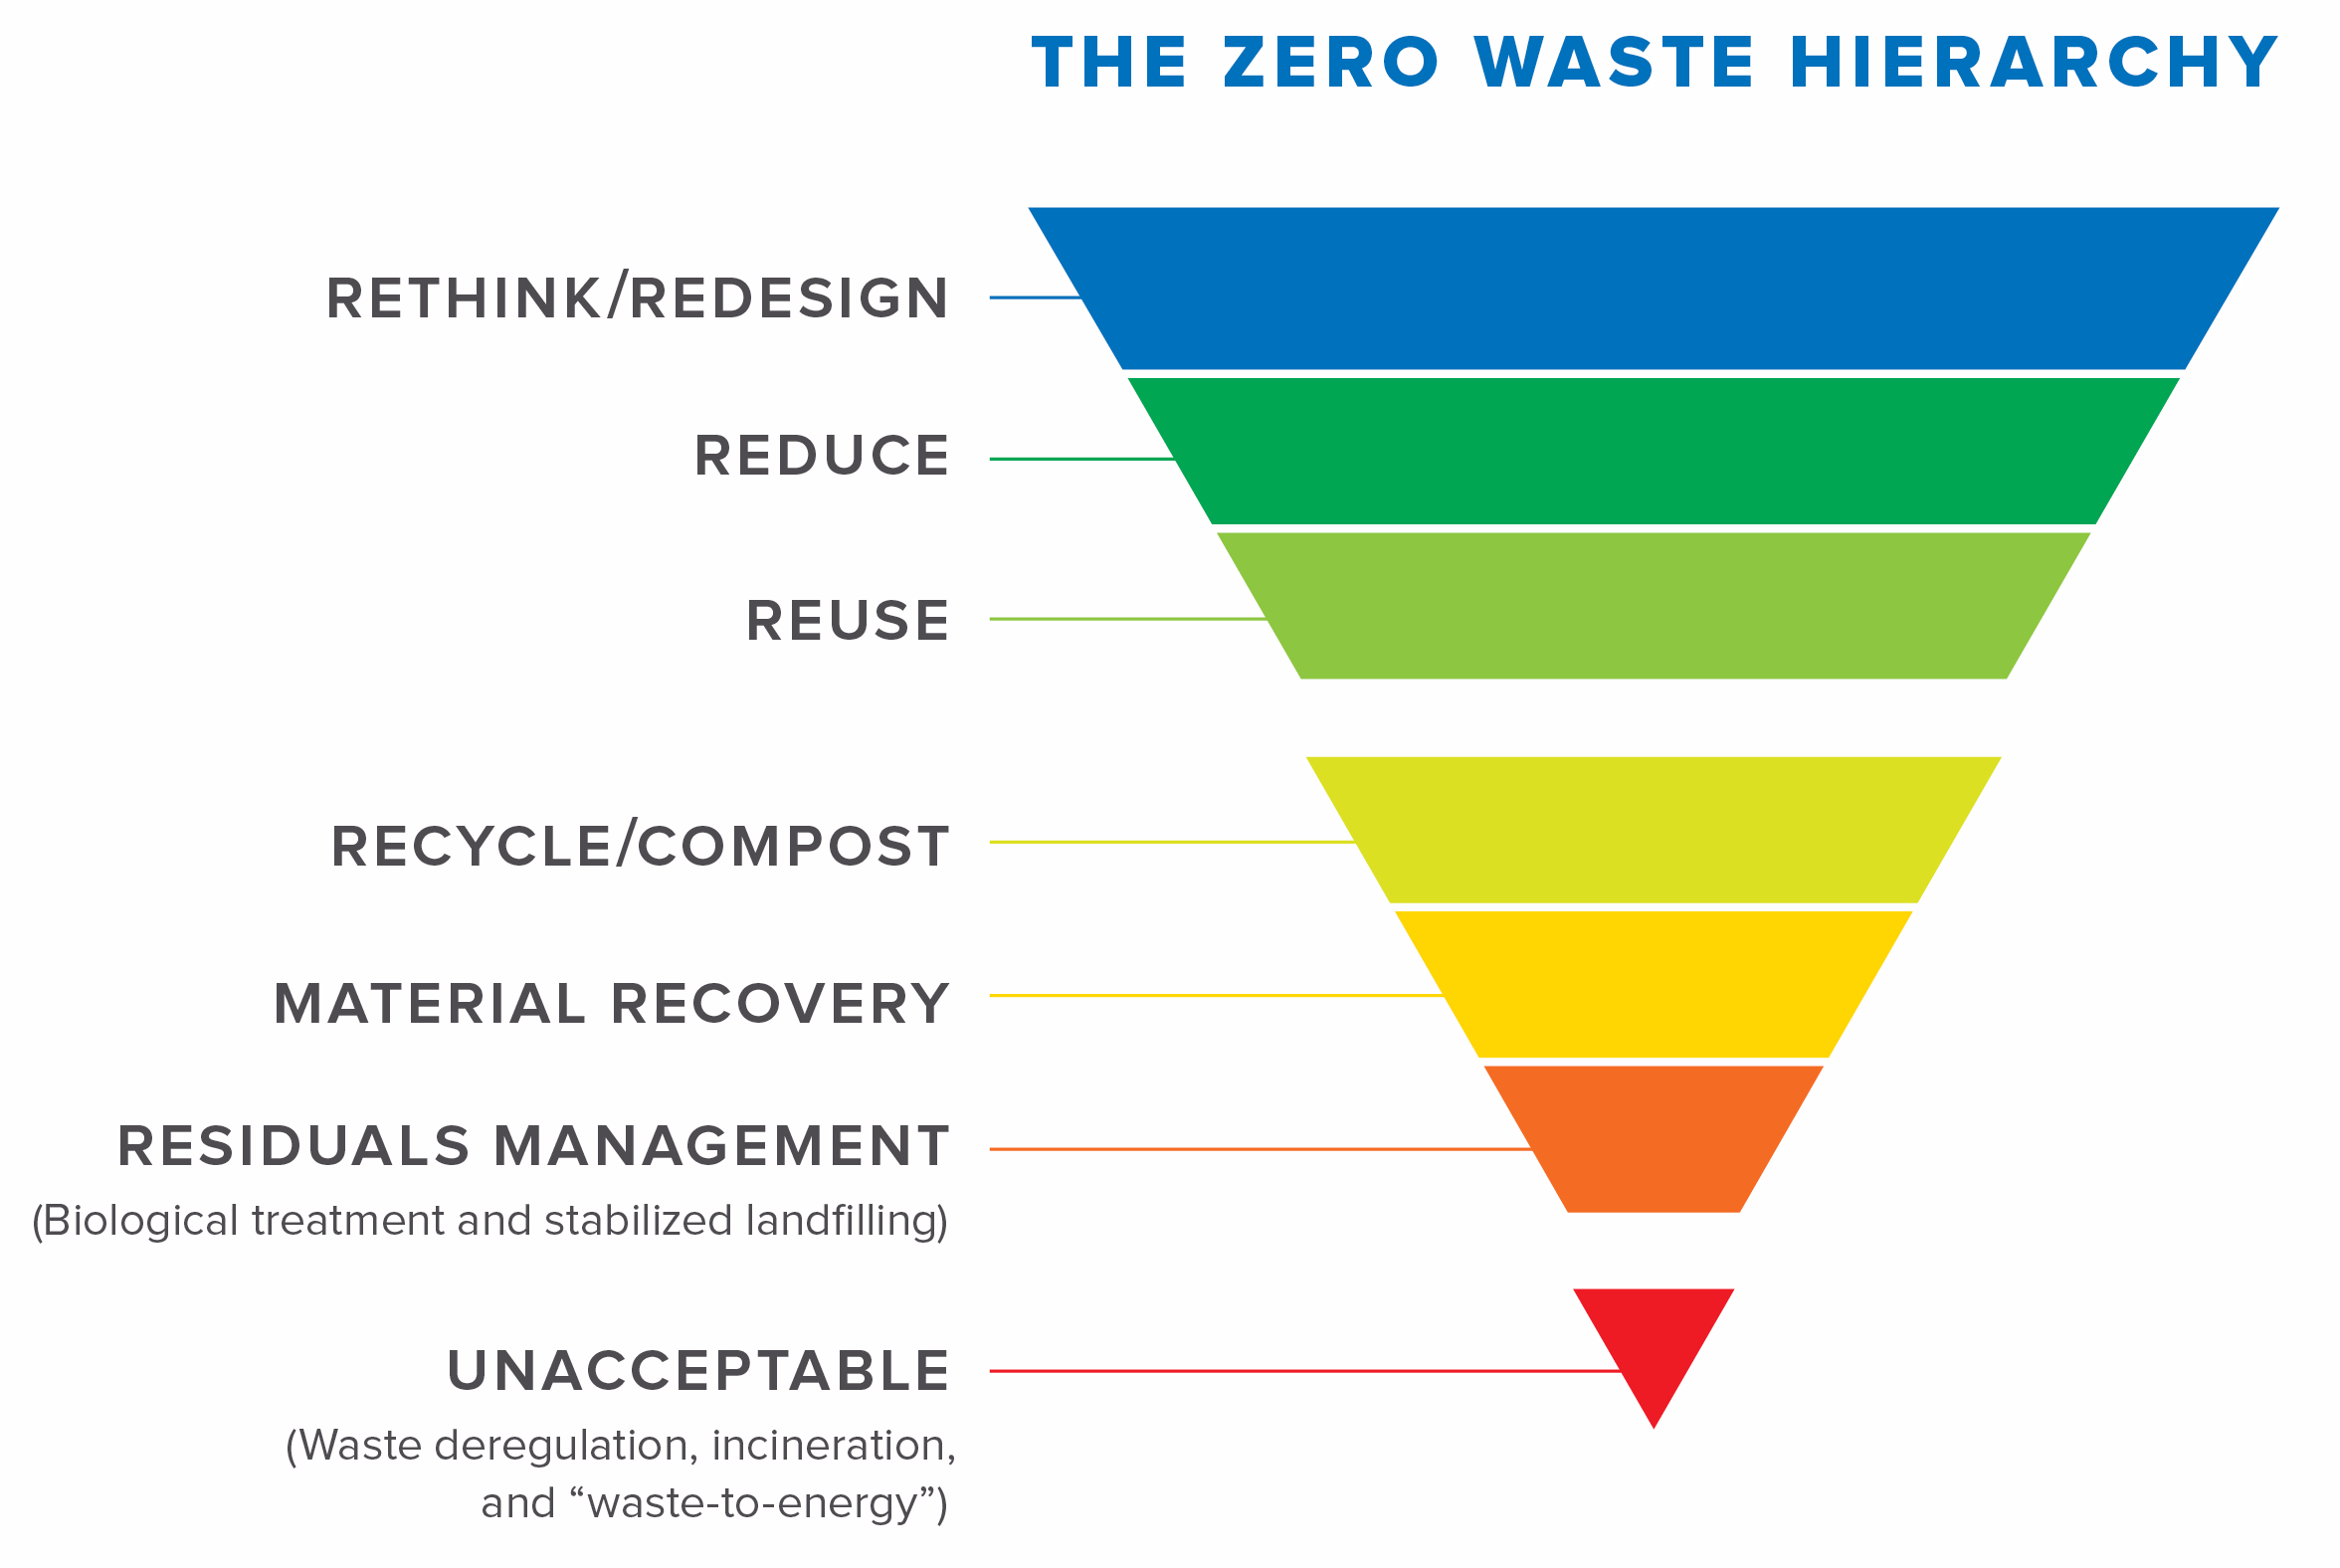 http://www.energyjustice.net/files/waste/hierarchy.png